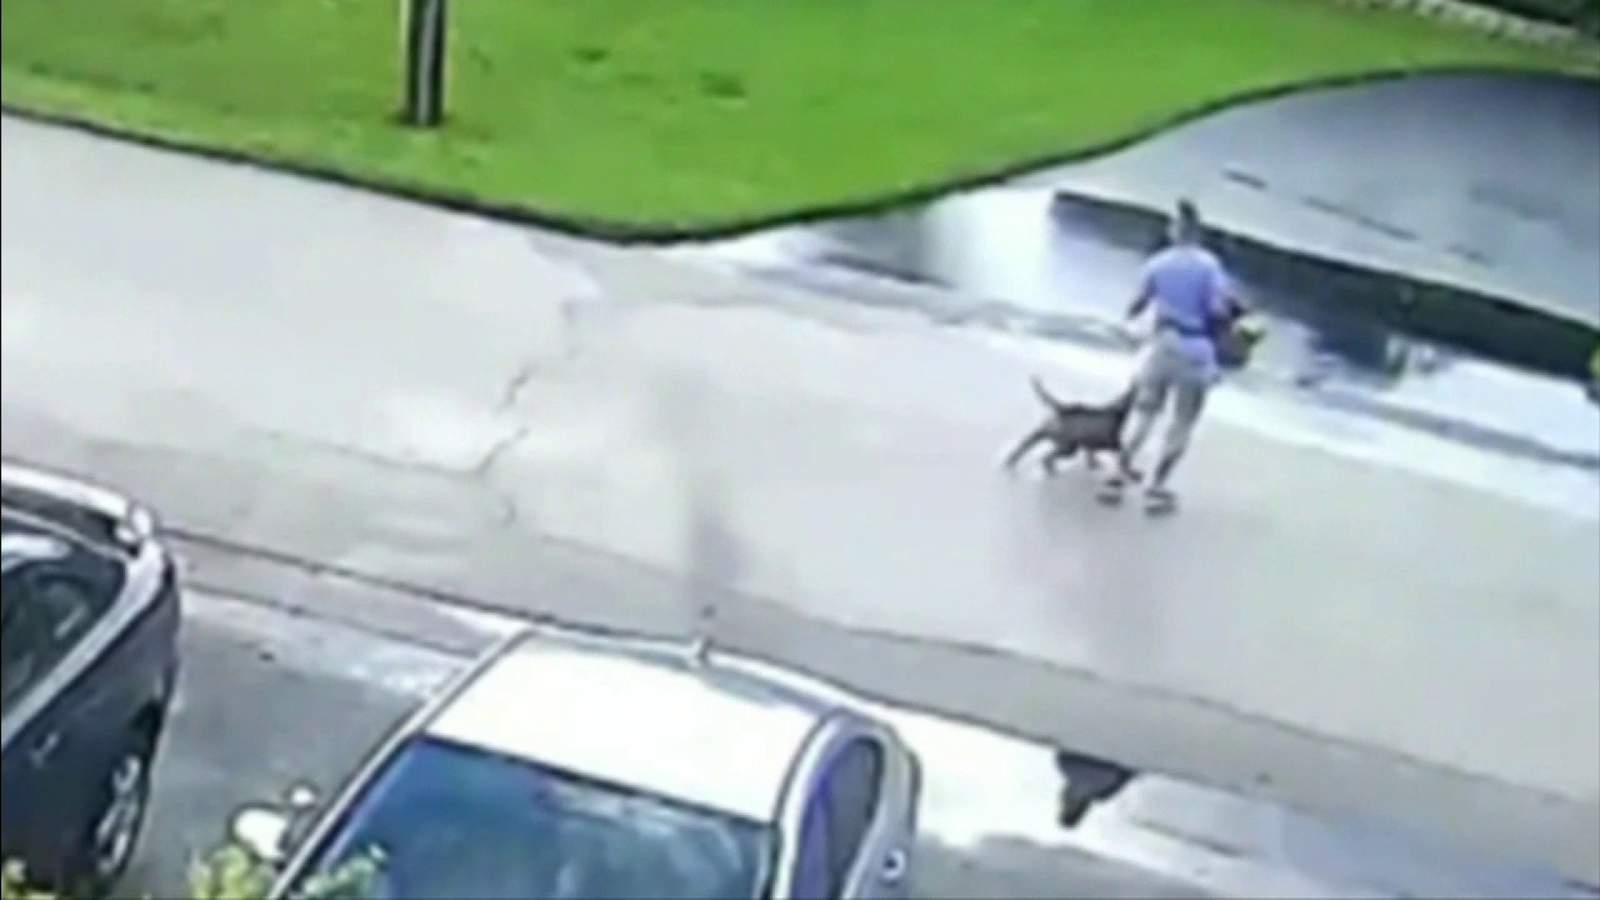 WATCH: Dog involved in vicious attack caught on video taken from home, owner cited previously